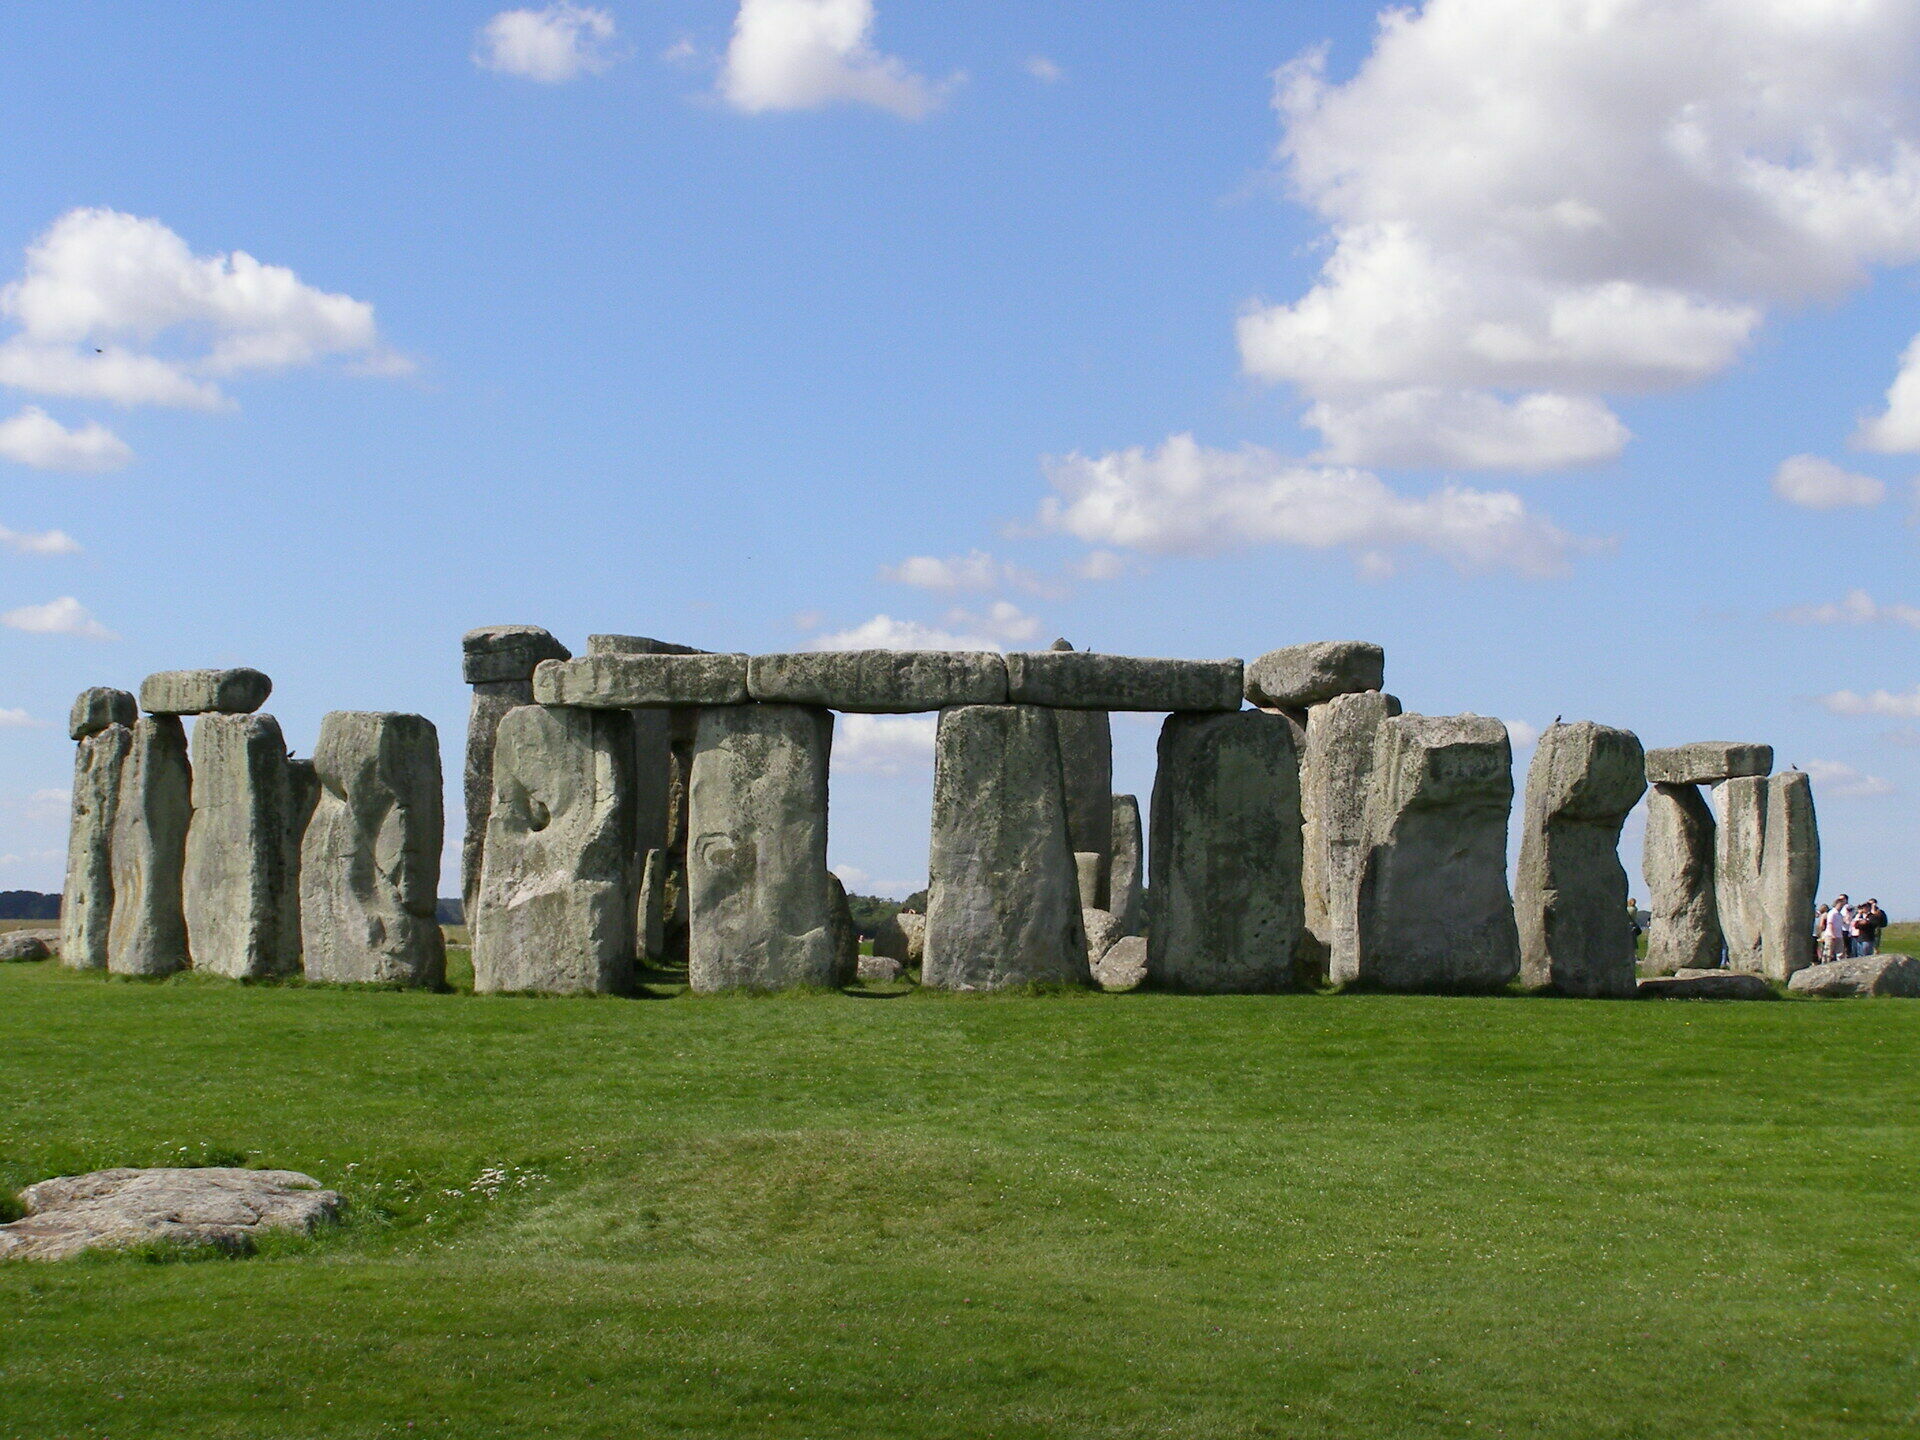 Computer from ancient Egypt: Russian mathematician has solved the mystery of Stonehenge